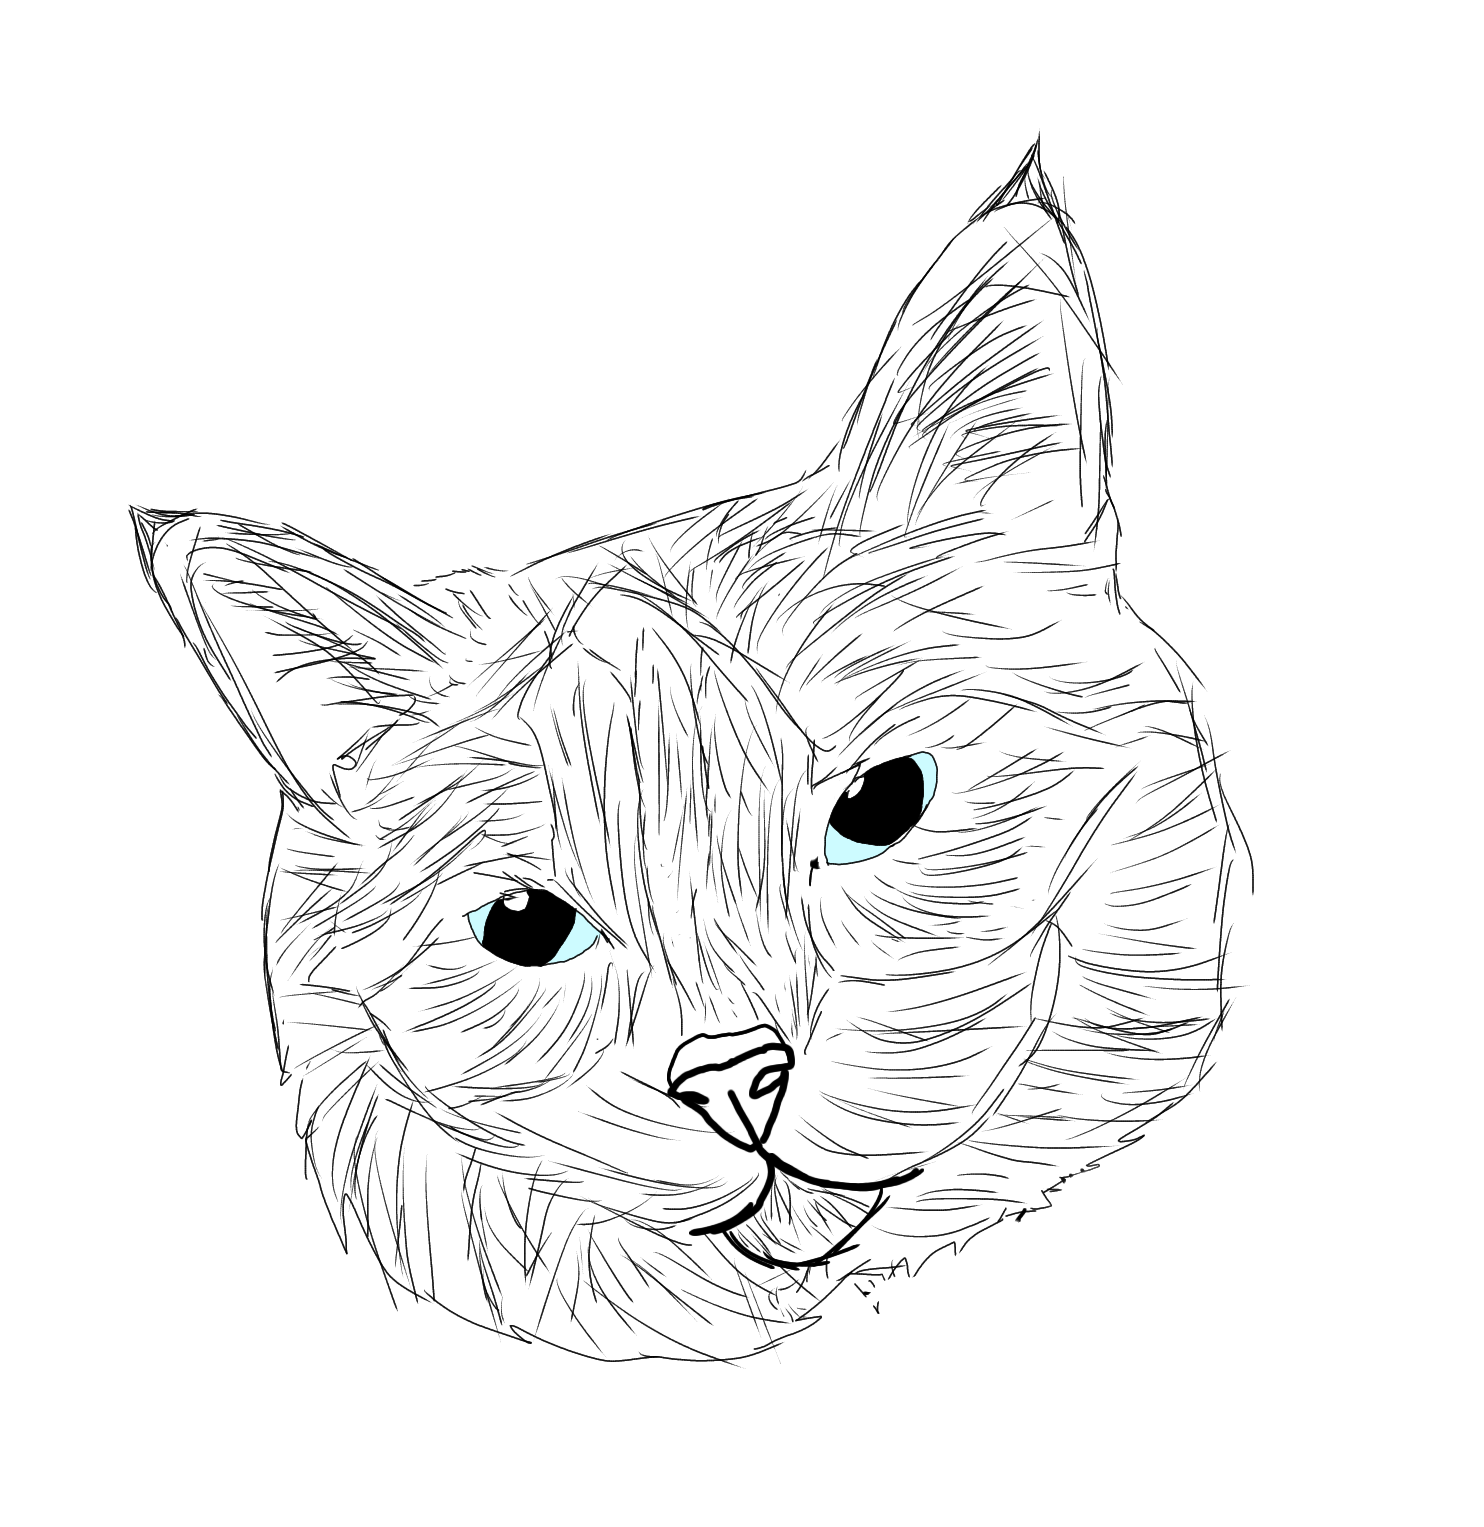 I was bored so I decided to draw over a picture of my grumpy cat, Renji